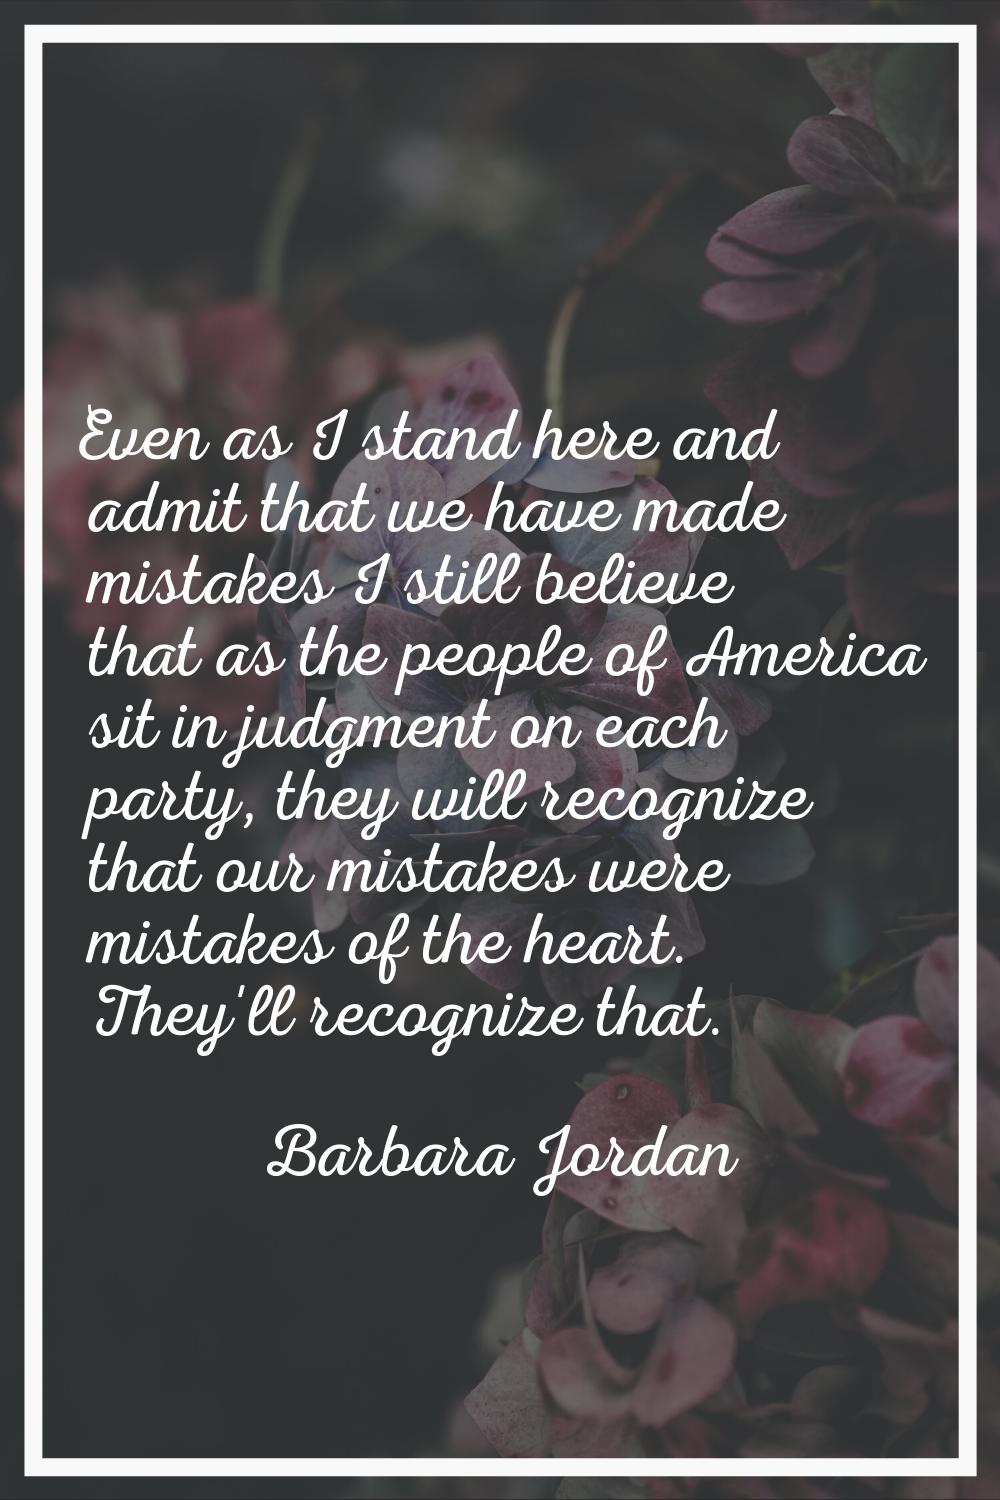 Even as I stand here and admit that we have made mistakes I still believe that as the people of Ame